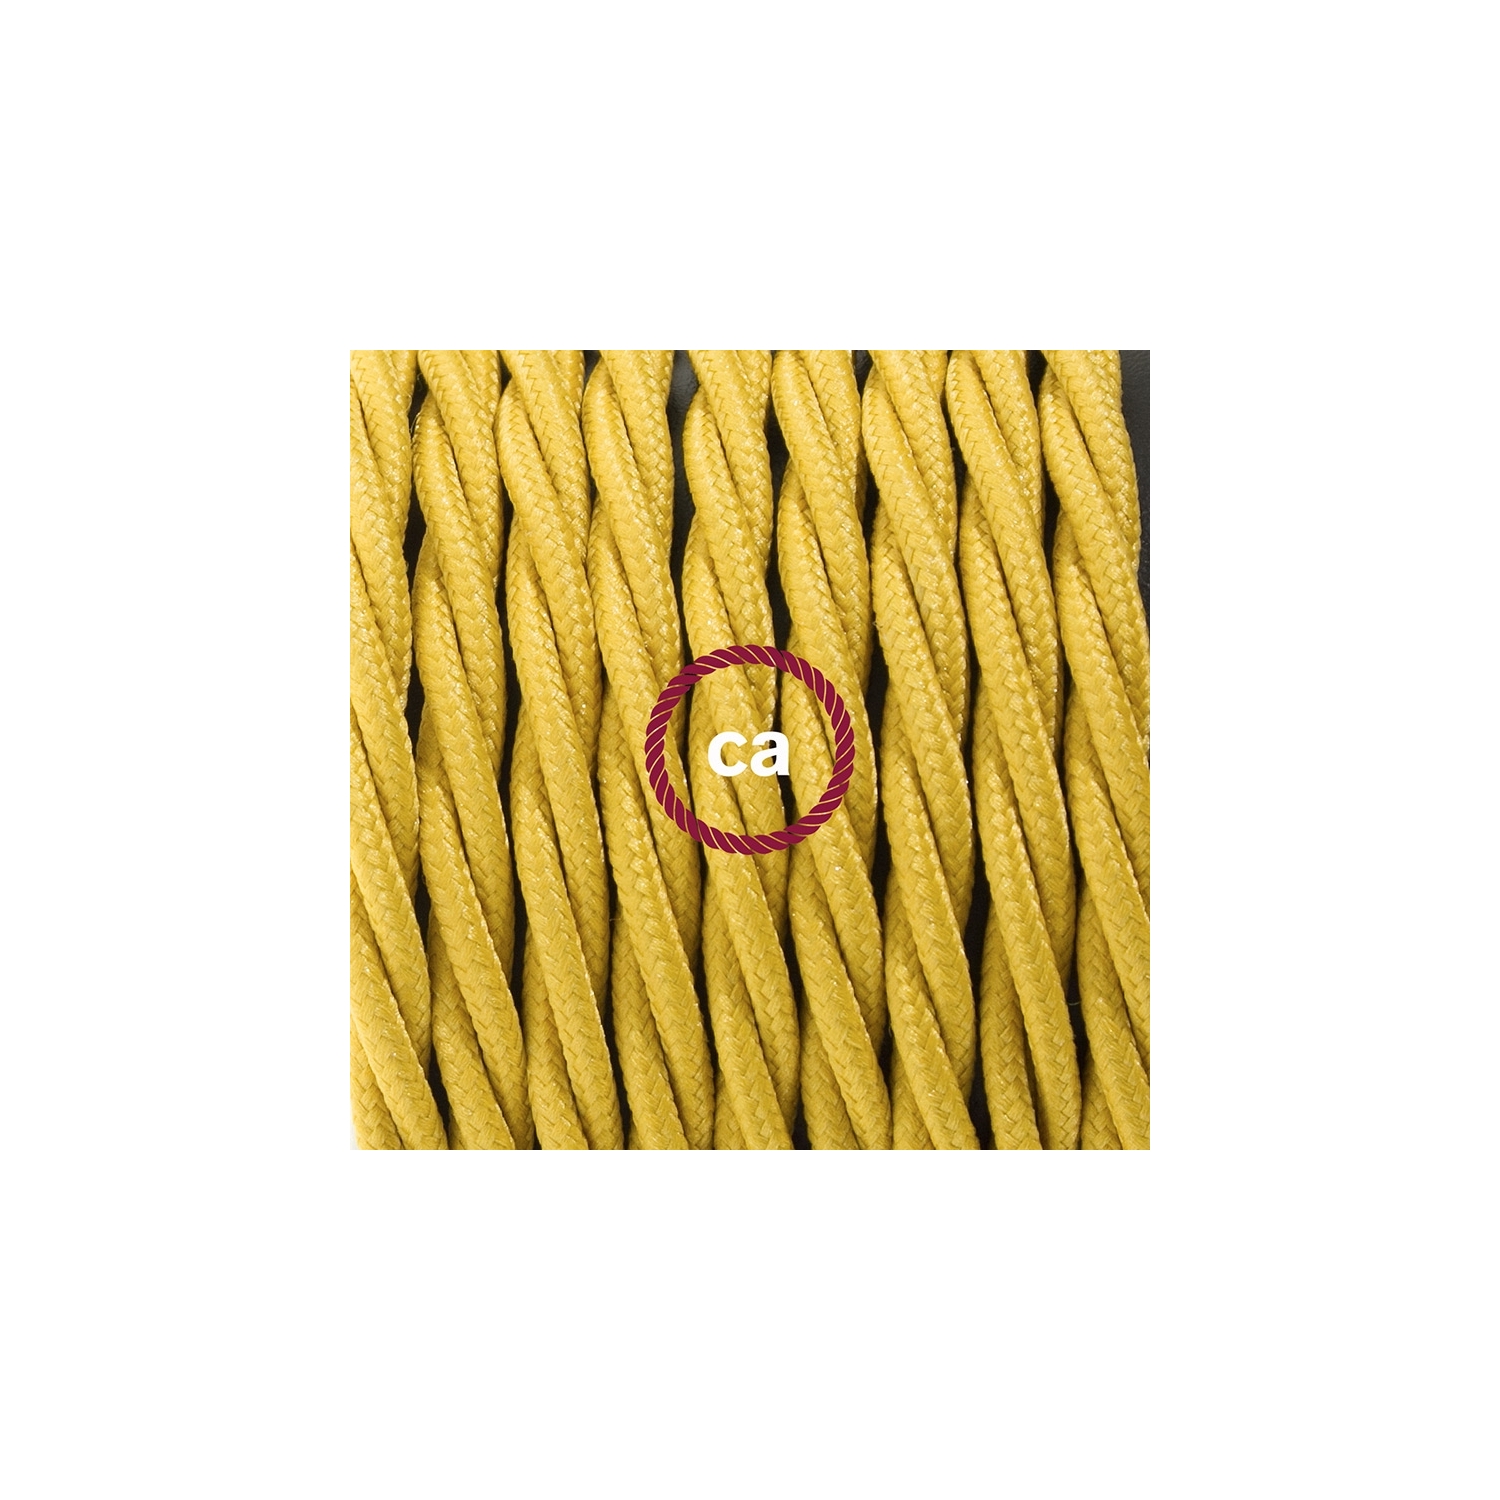 Create your TM25 Mustard Rayon Snake for lampshade and bring the light wherever you want.